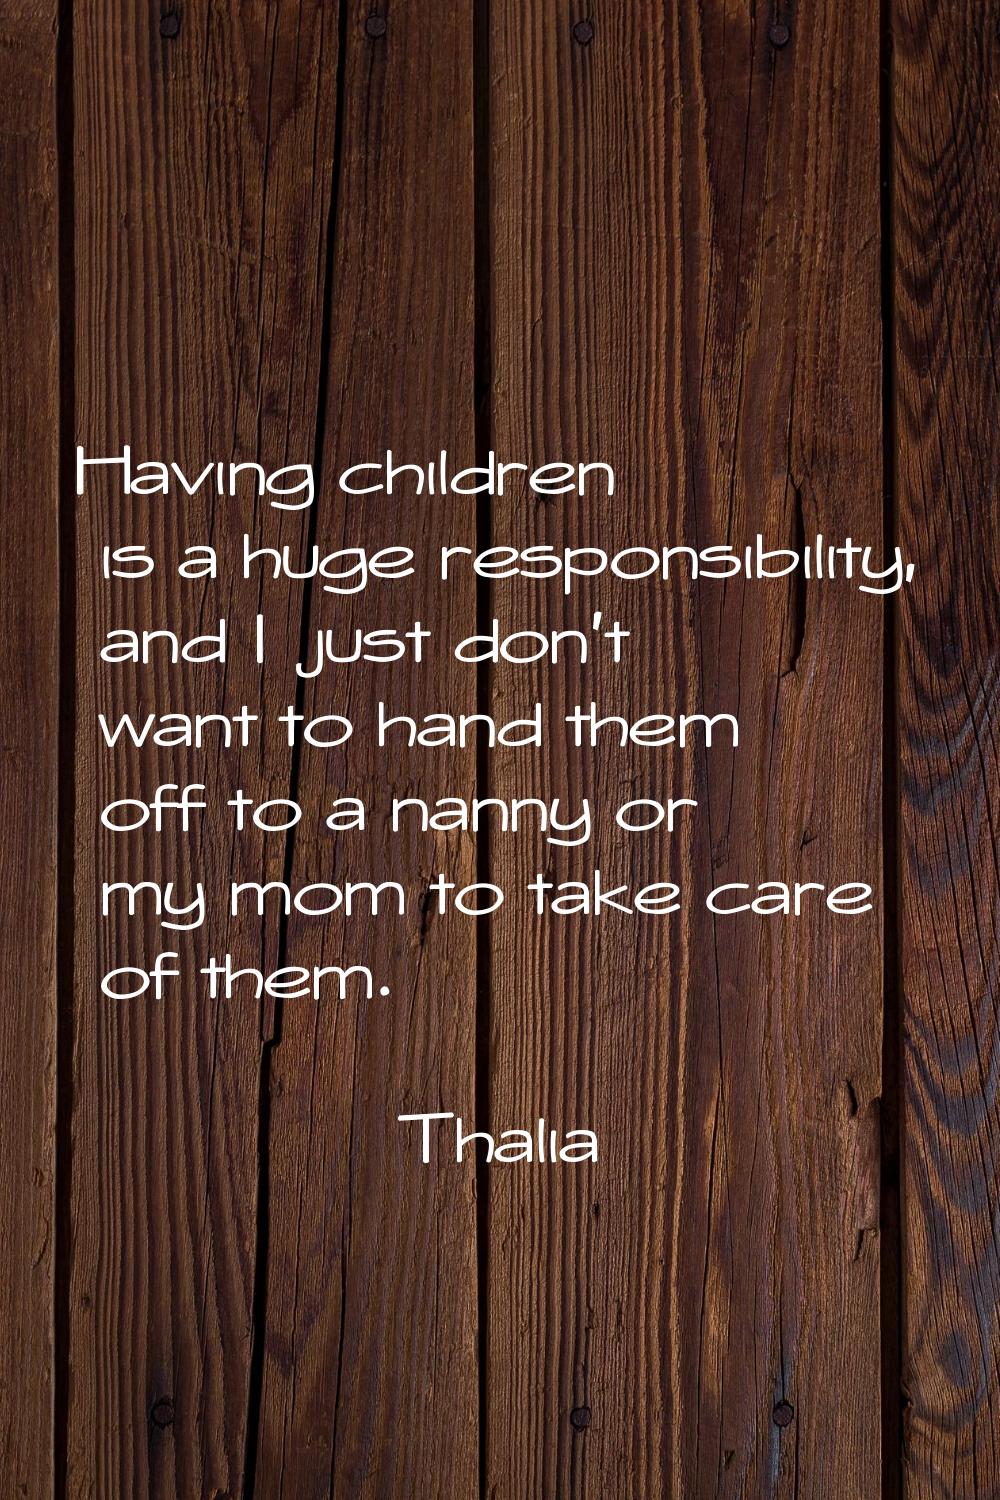 Having children is a huge responsibility, and I just don't want to hand them off to a nanny or my m